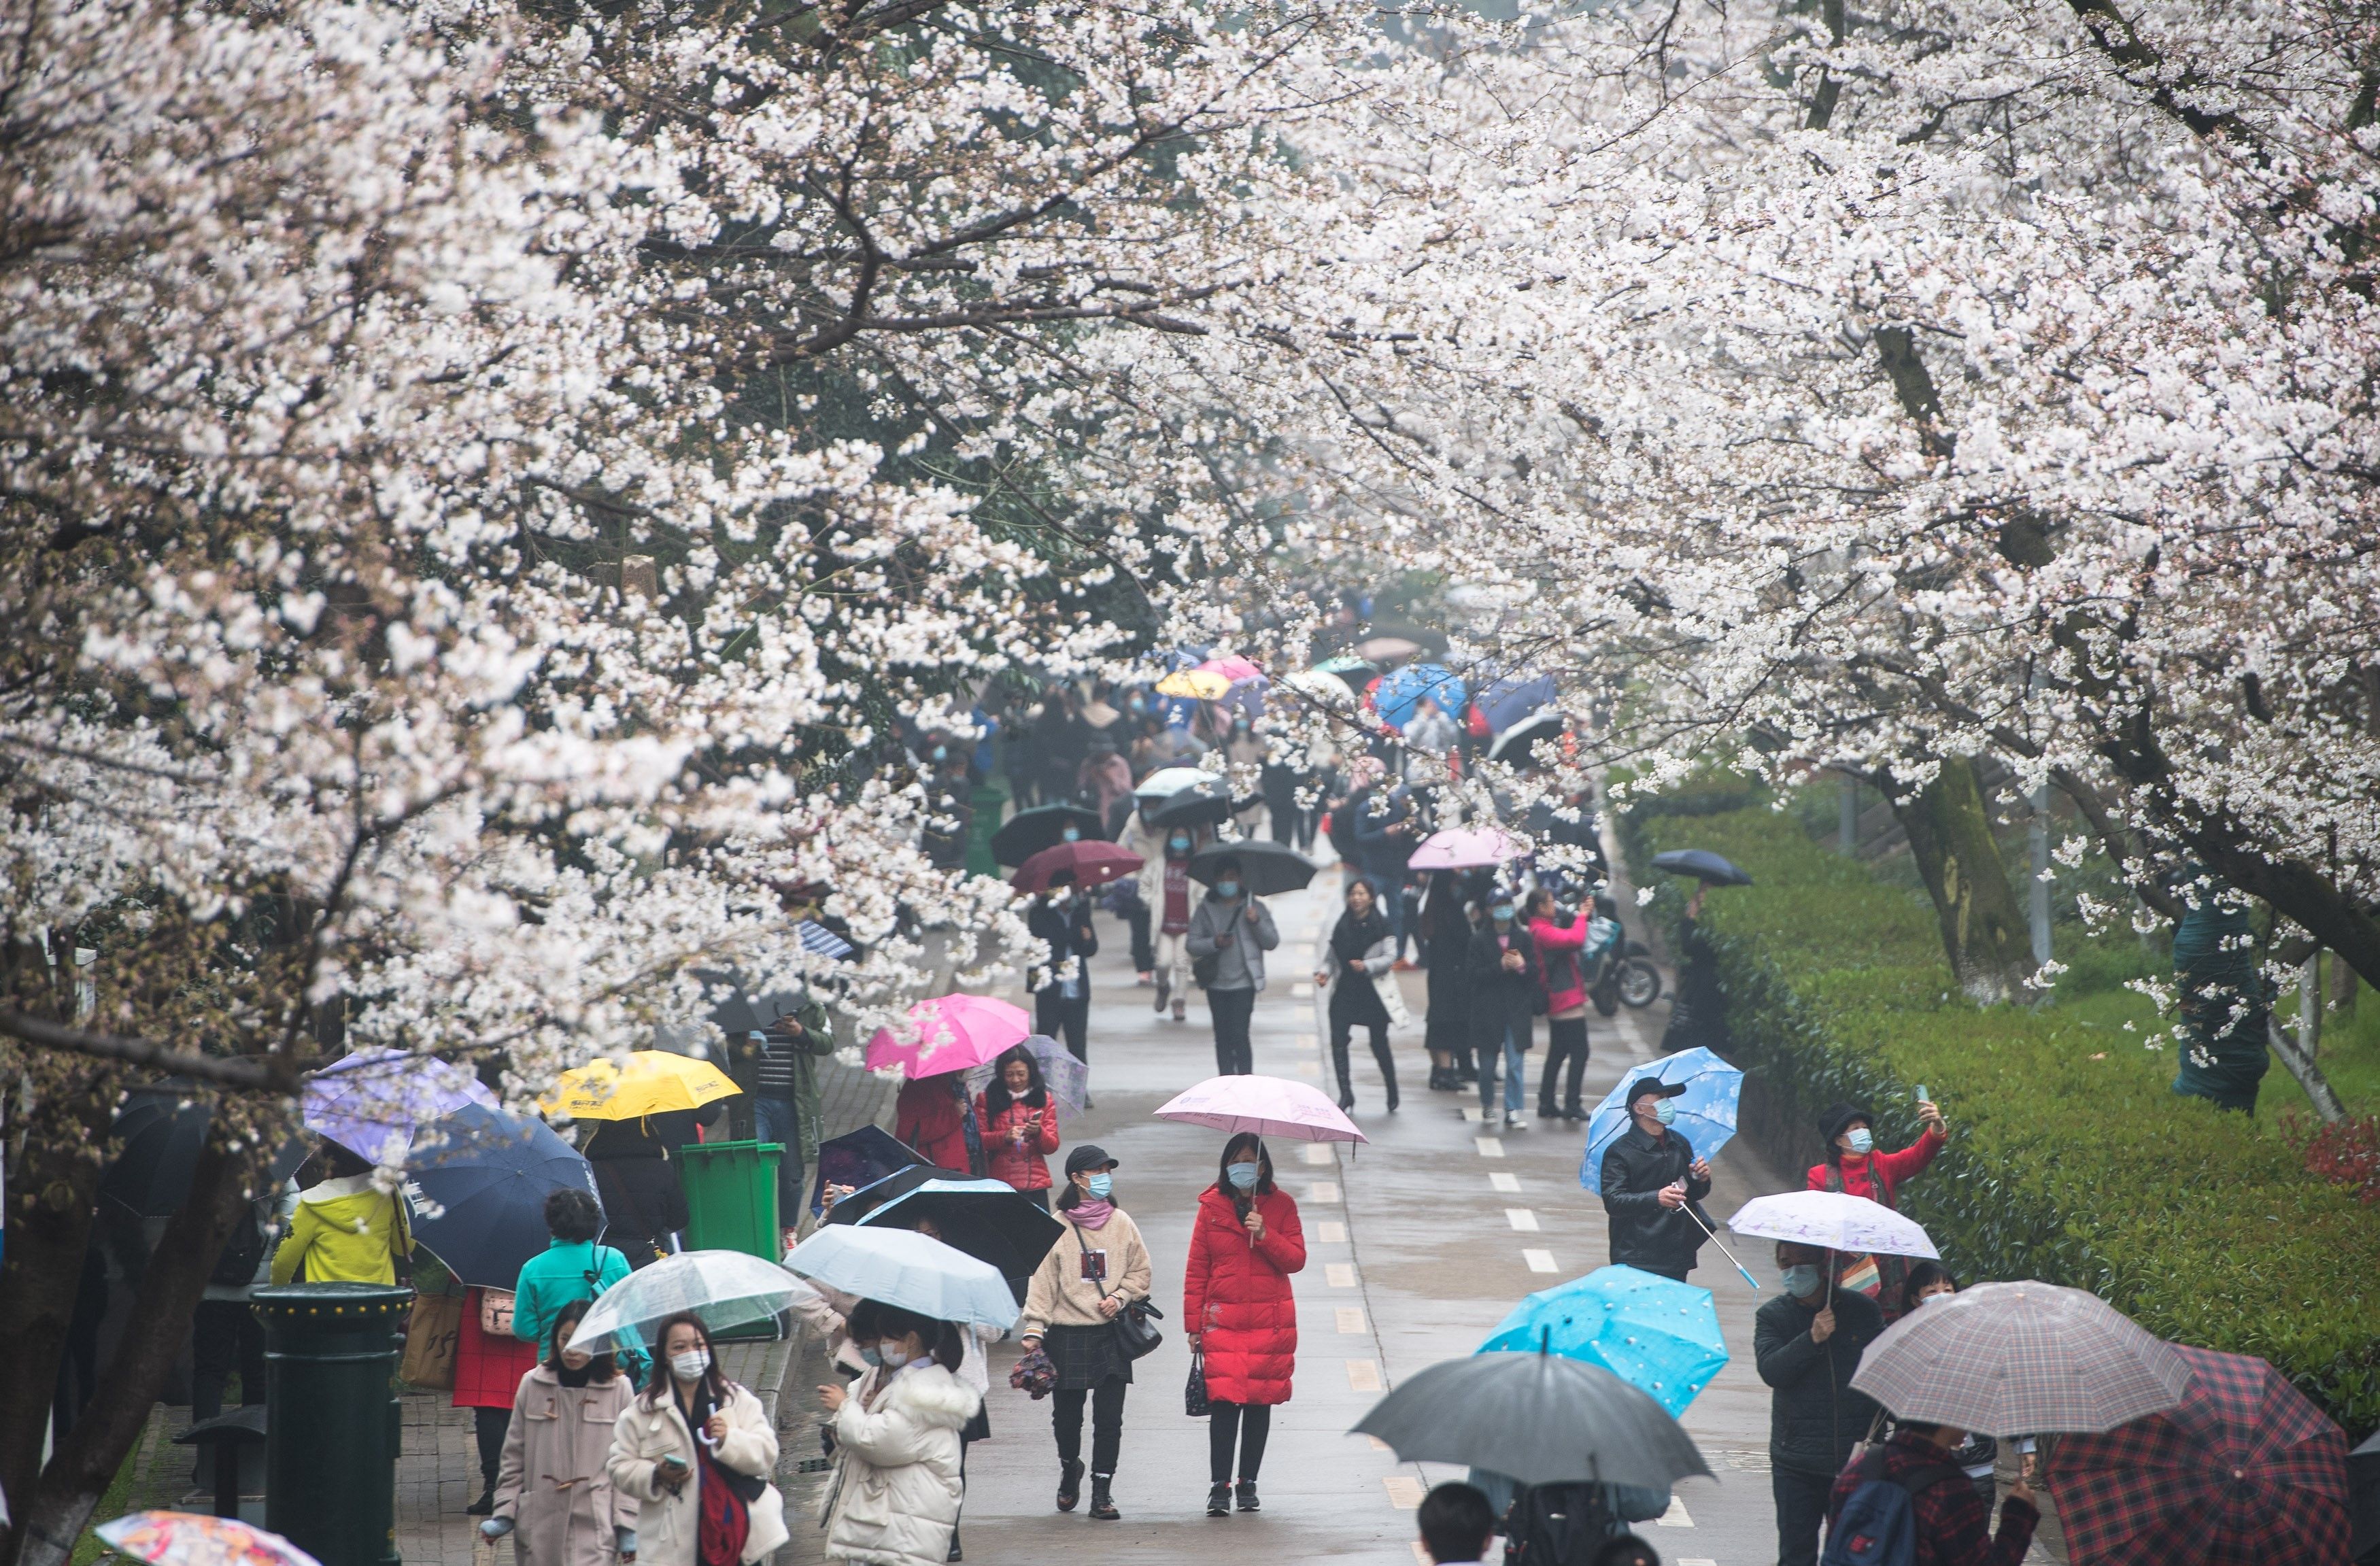 Tourists view cherry blossoms at Wuhan University in Wuhan, capital of central China's Hubei Province, March 8